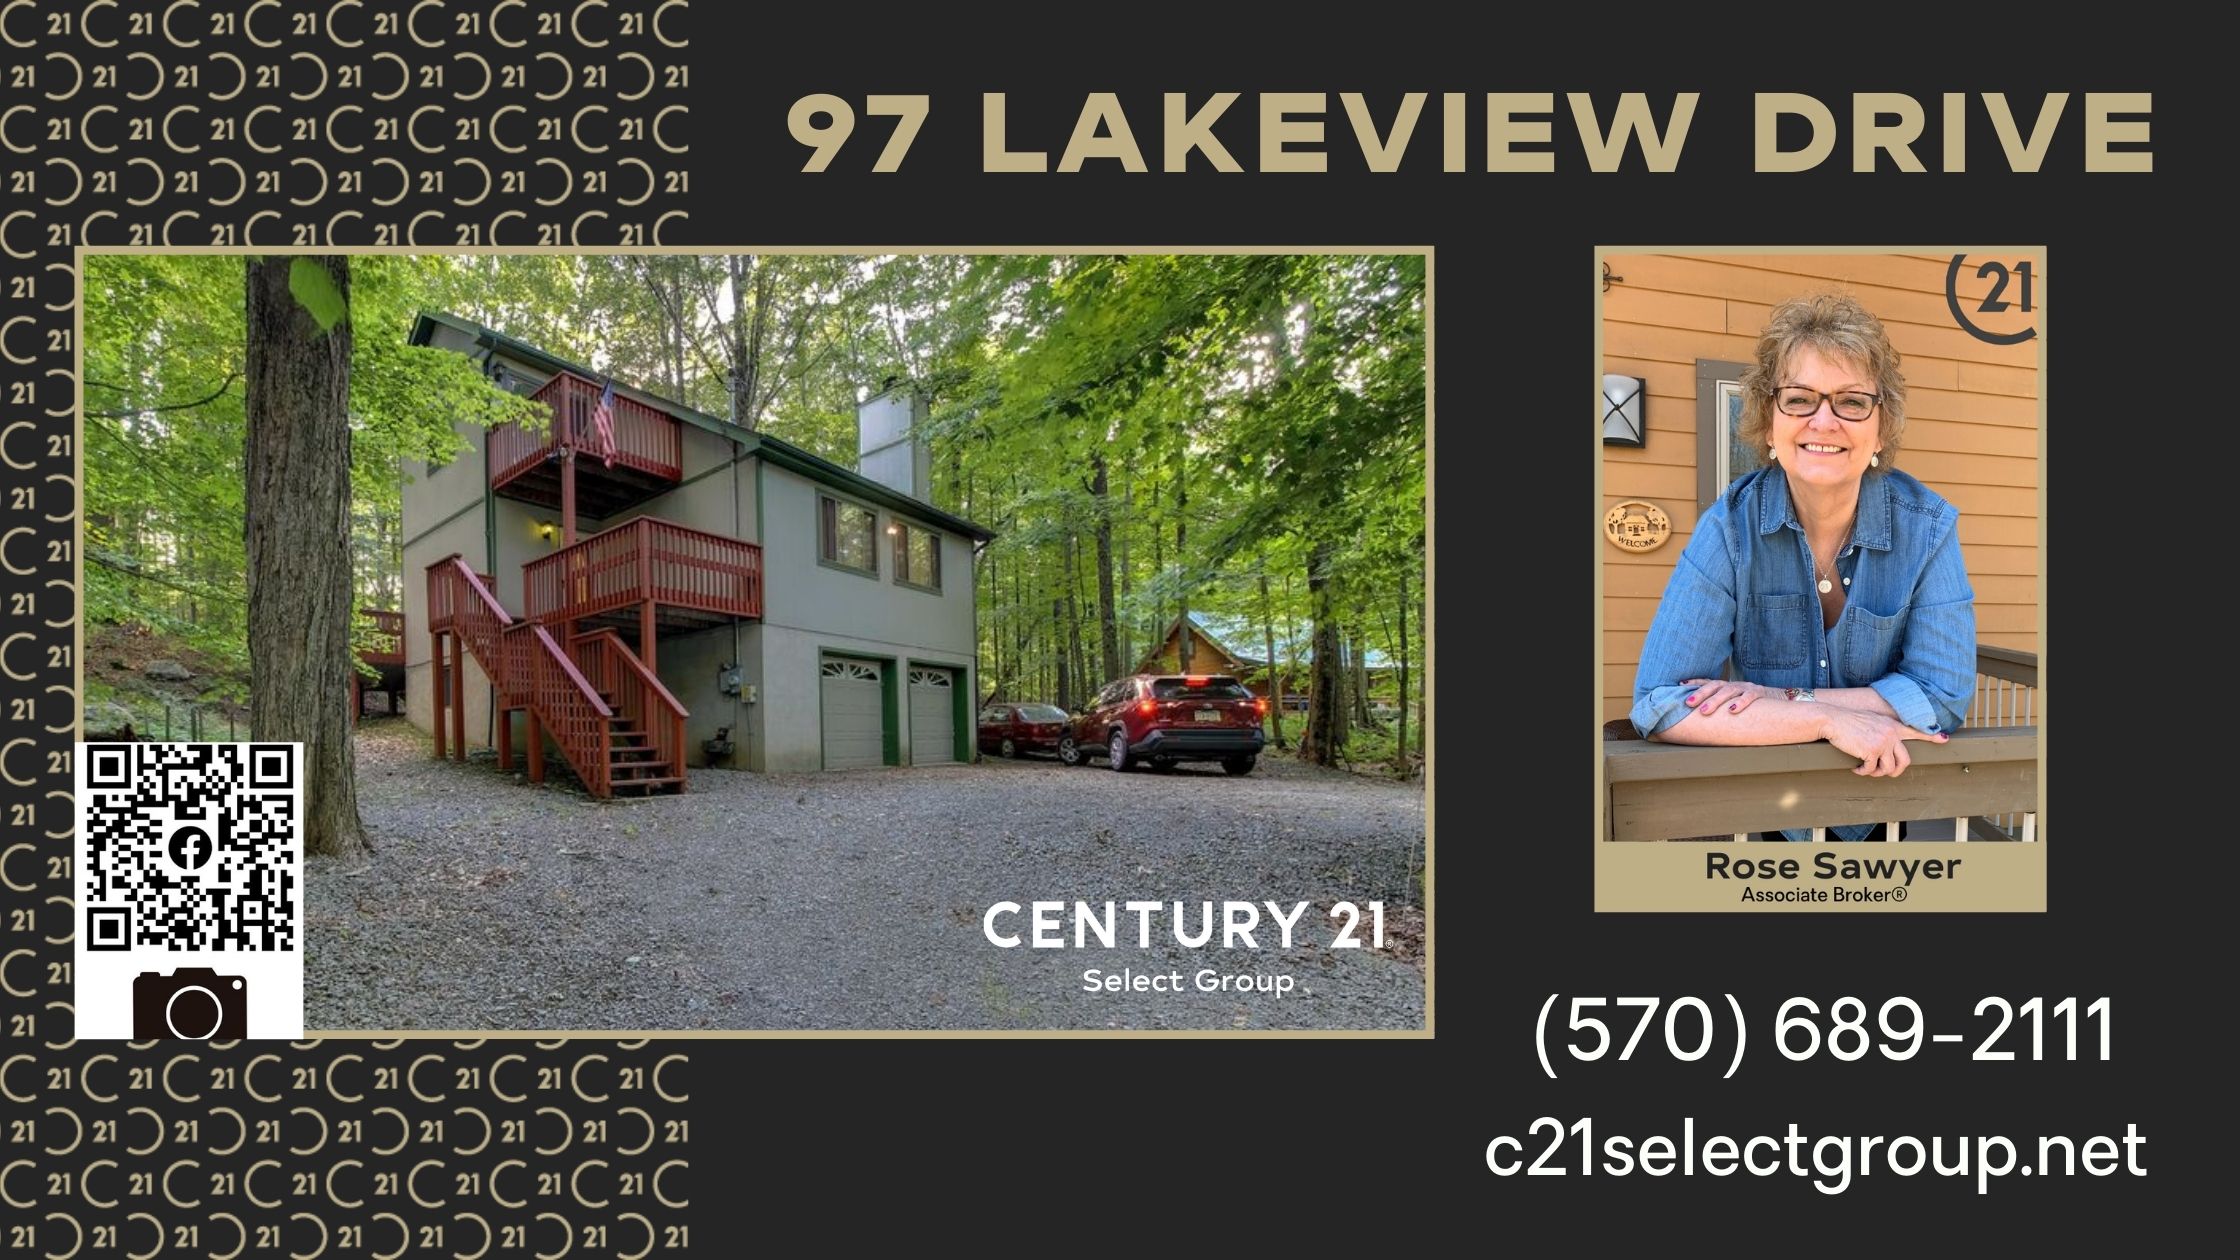 REDUCED PRICE! 97 Lakeview Drive: Hideout Saltbox Home